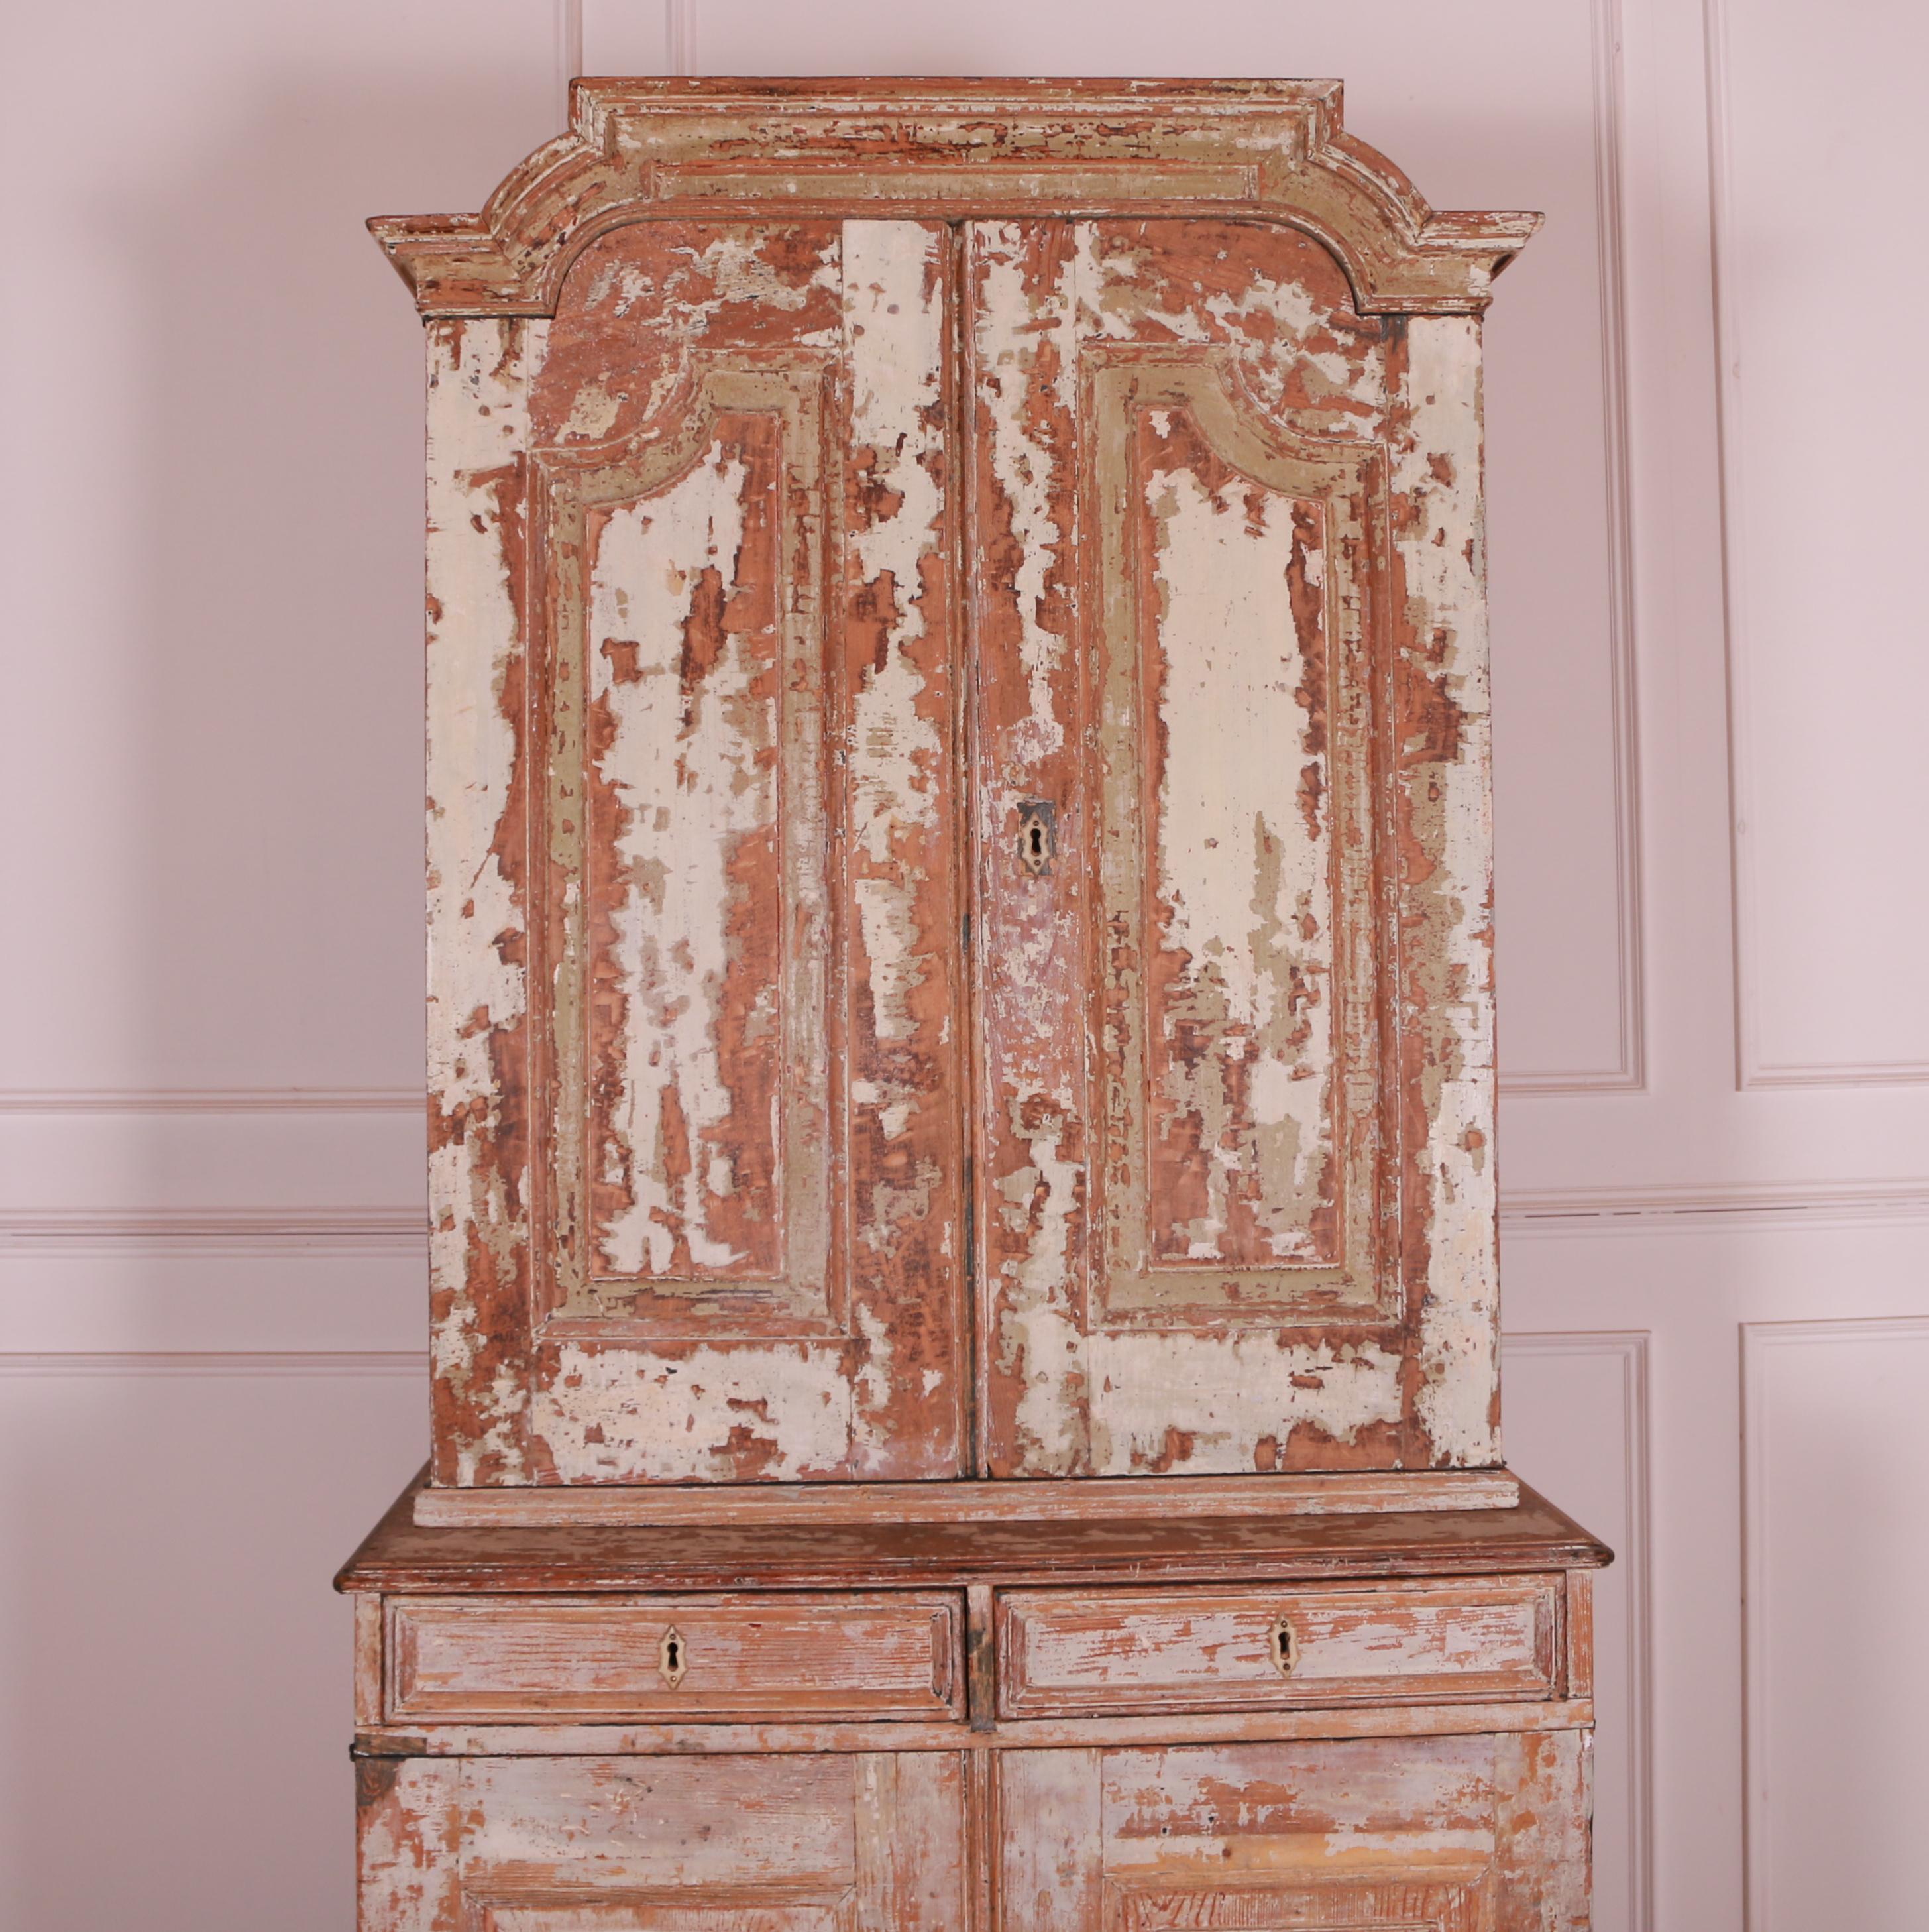 Interesting 19th C Swedish pine linen cupboard with very worn old paint. 1840.

Reference: 7567

Dimensions
39 inches (99 cms) wide
21.5 inches (55 cms) deep
87 inches (221 cms) high.